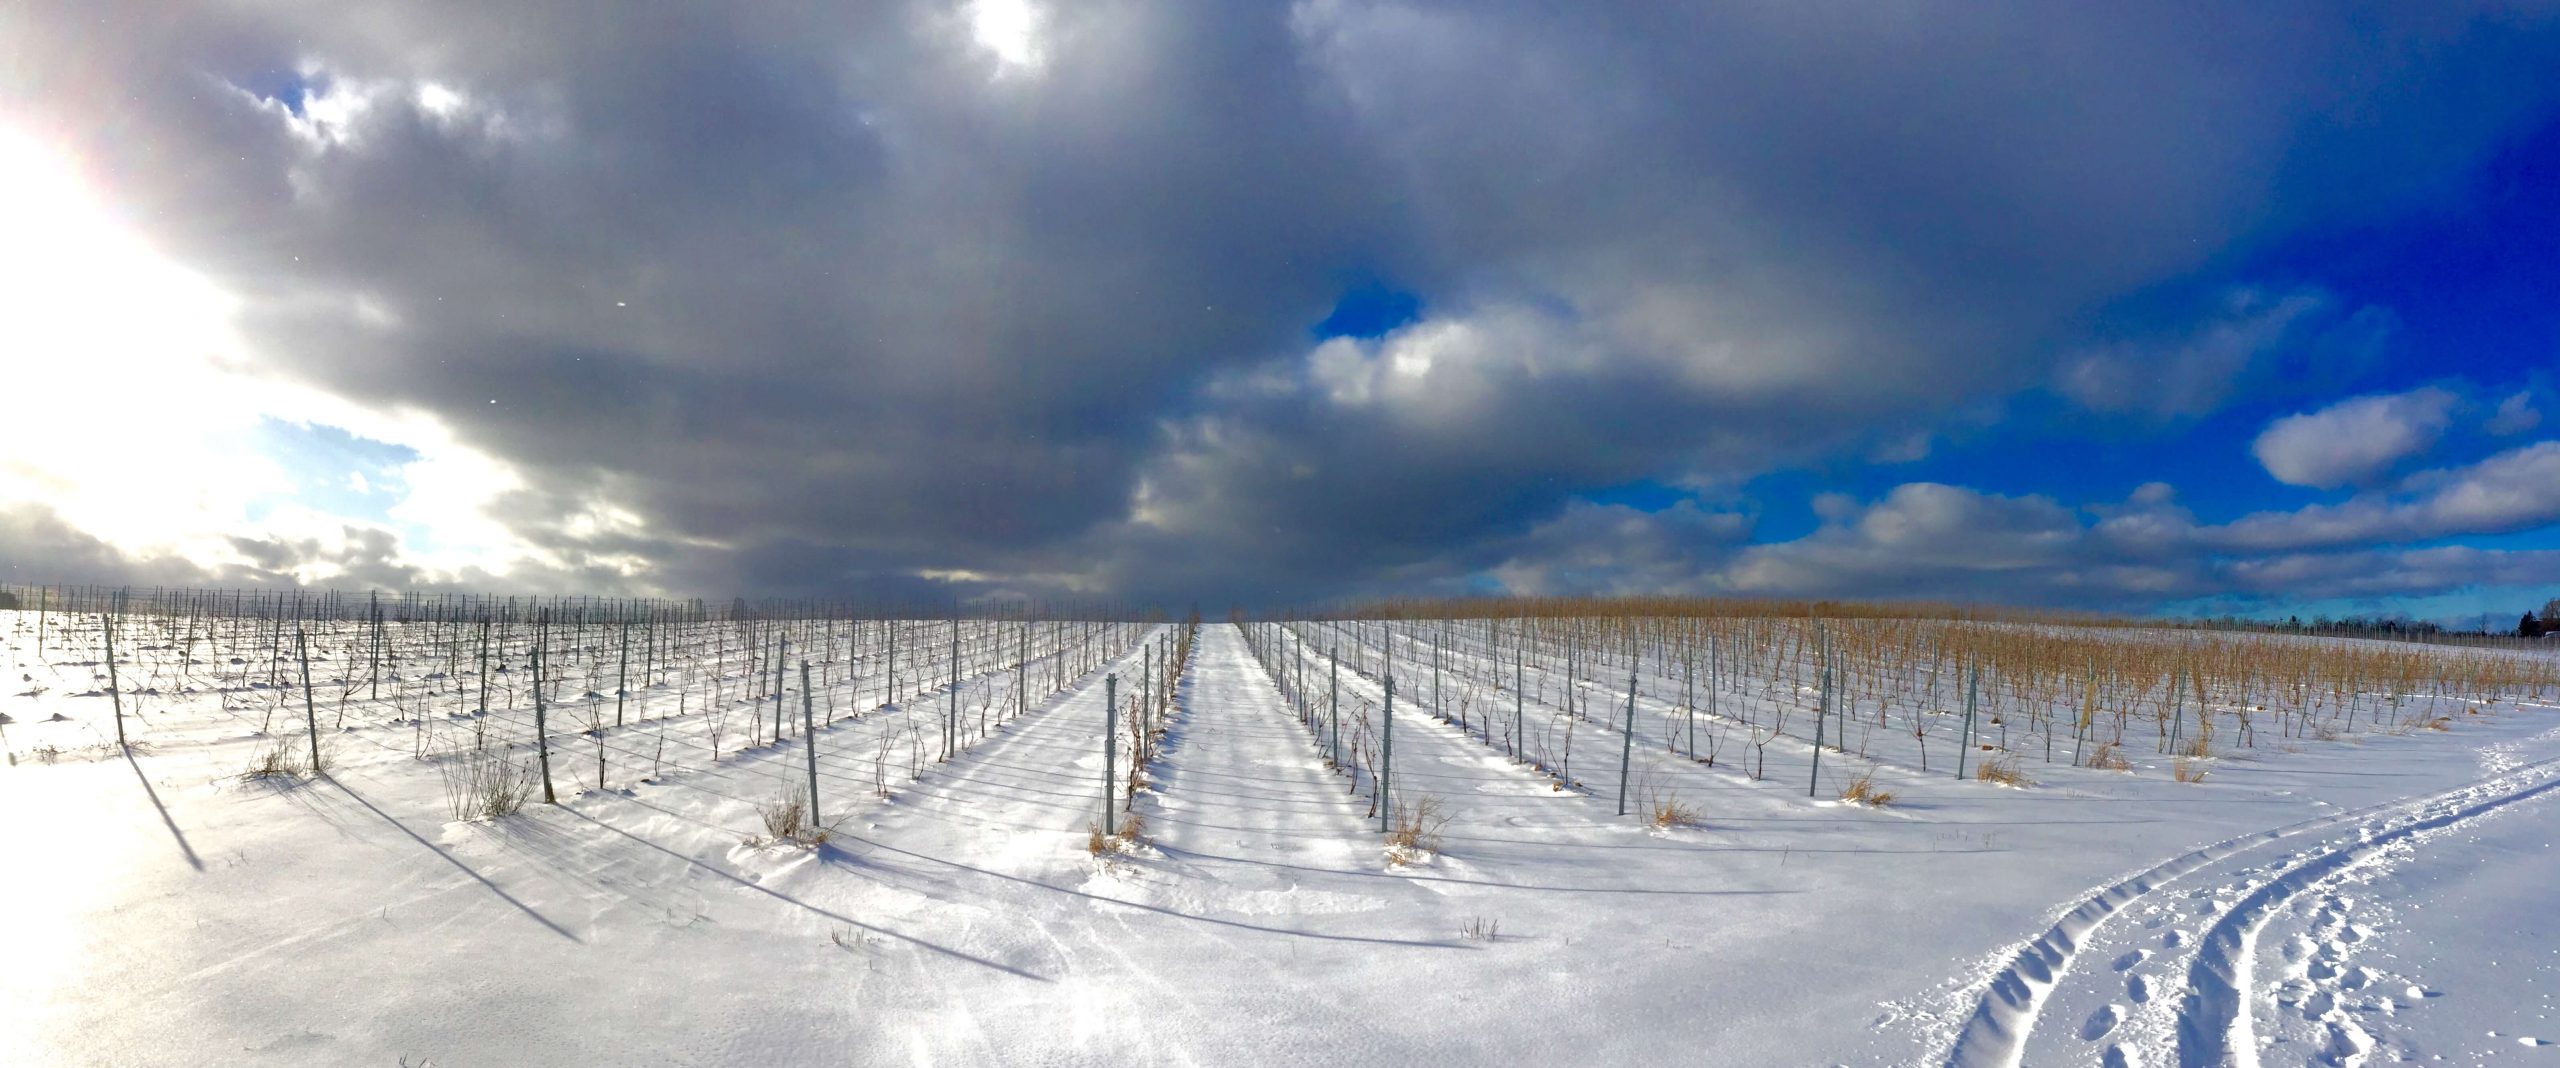 Last years Pinot Noir planting stretches the limits of survival in a Nova Scotia vineyard